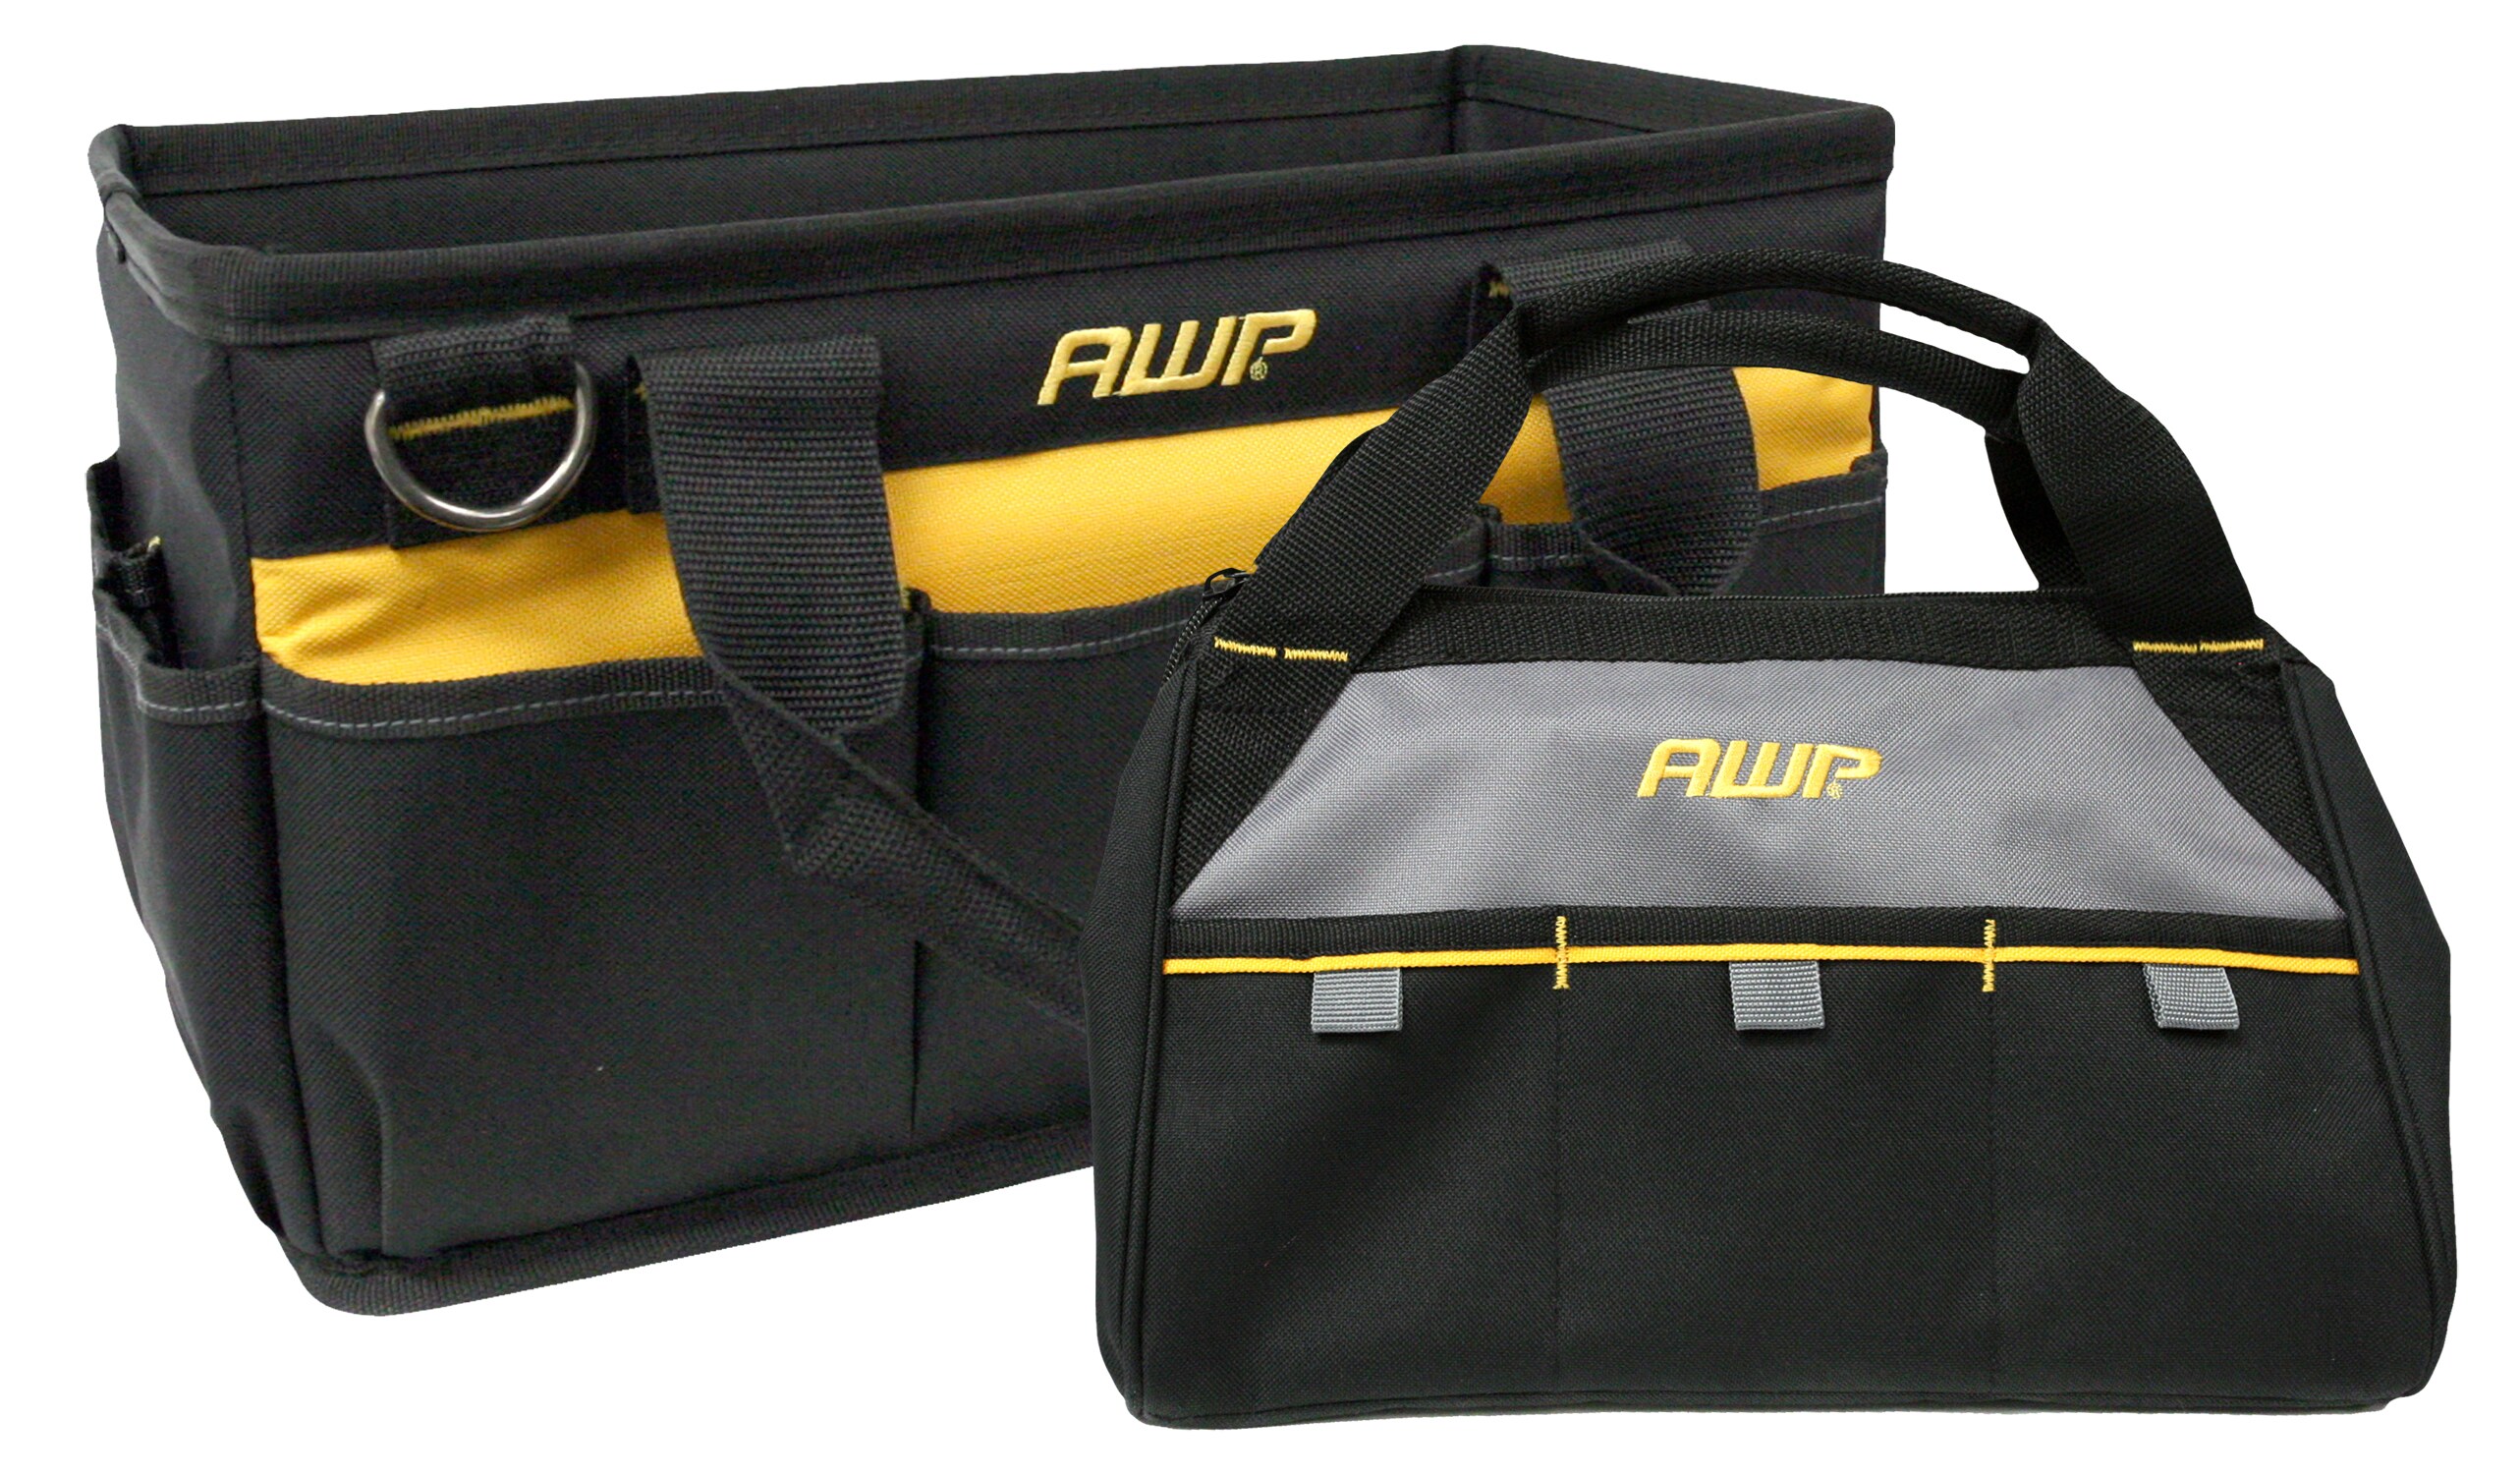 NEW AWP 15" x 12" x 8" 8-Pocket Carrying Handle Tool-Bag Box Tote Portable Case 